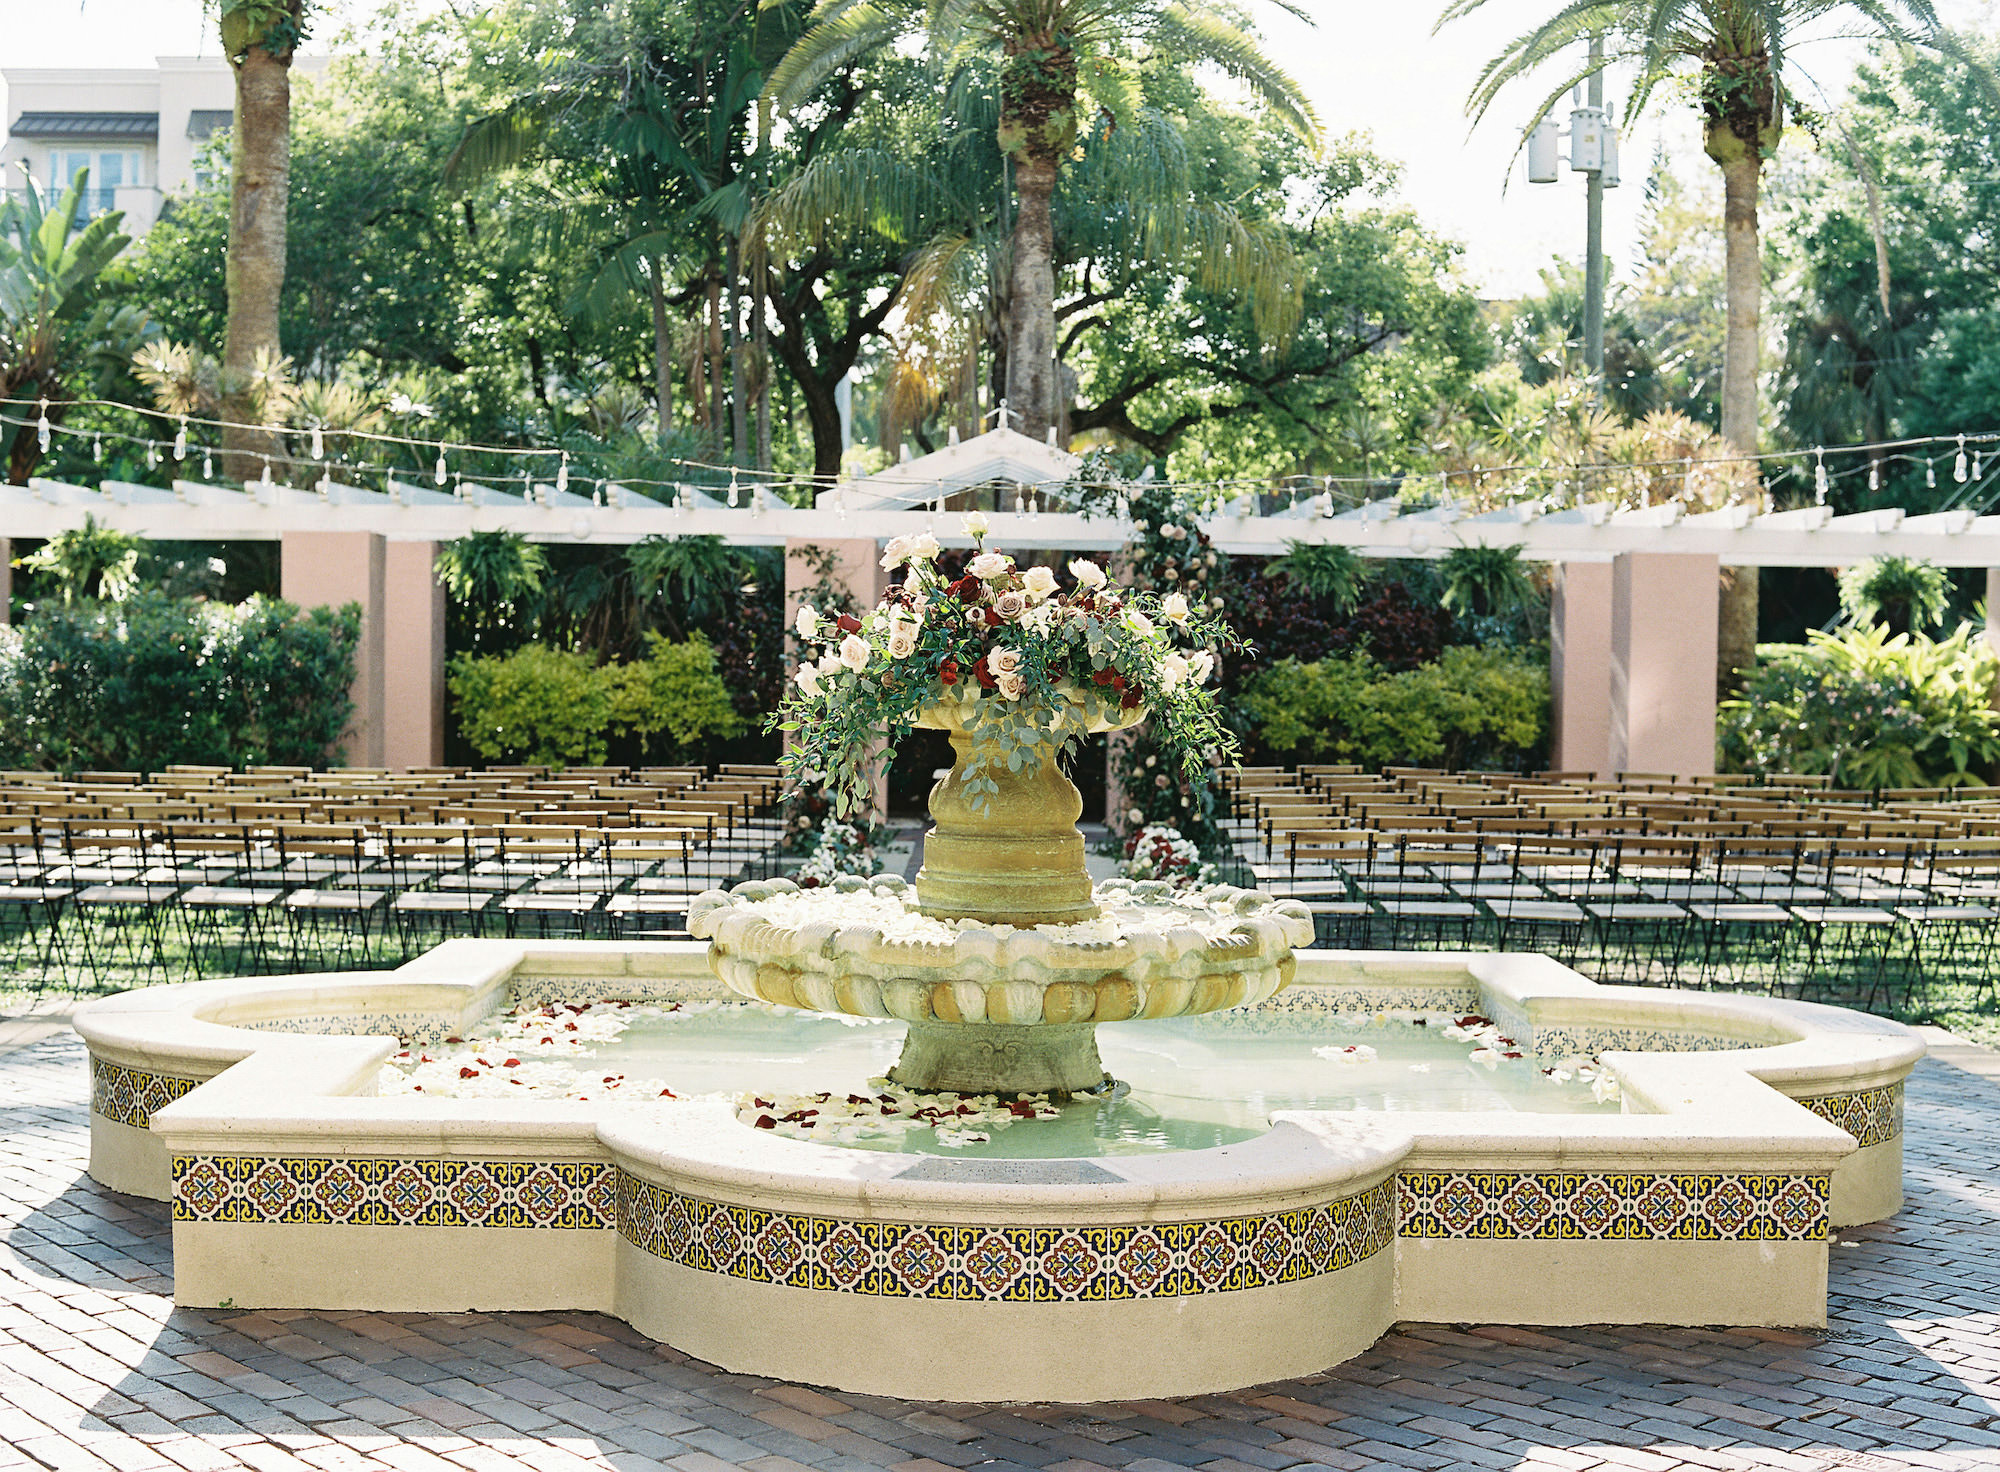 Royal Glam Gatsby Elegant Outdoor Courtyard Wedding Ceremony Decor, Water Fountain with Greenery and White, Mauve and Red Roses Floral Arrangement | Tampa Bay Wedding Planner and Designer John Campbell Weddings | St. Pete Wedding Venue The Vinoy Renaissance